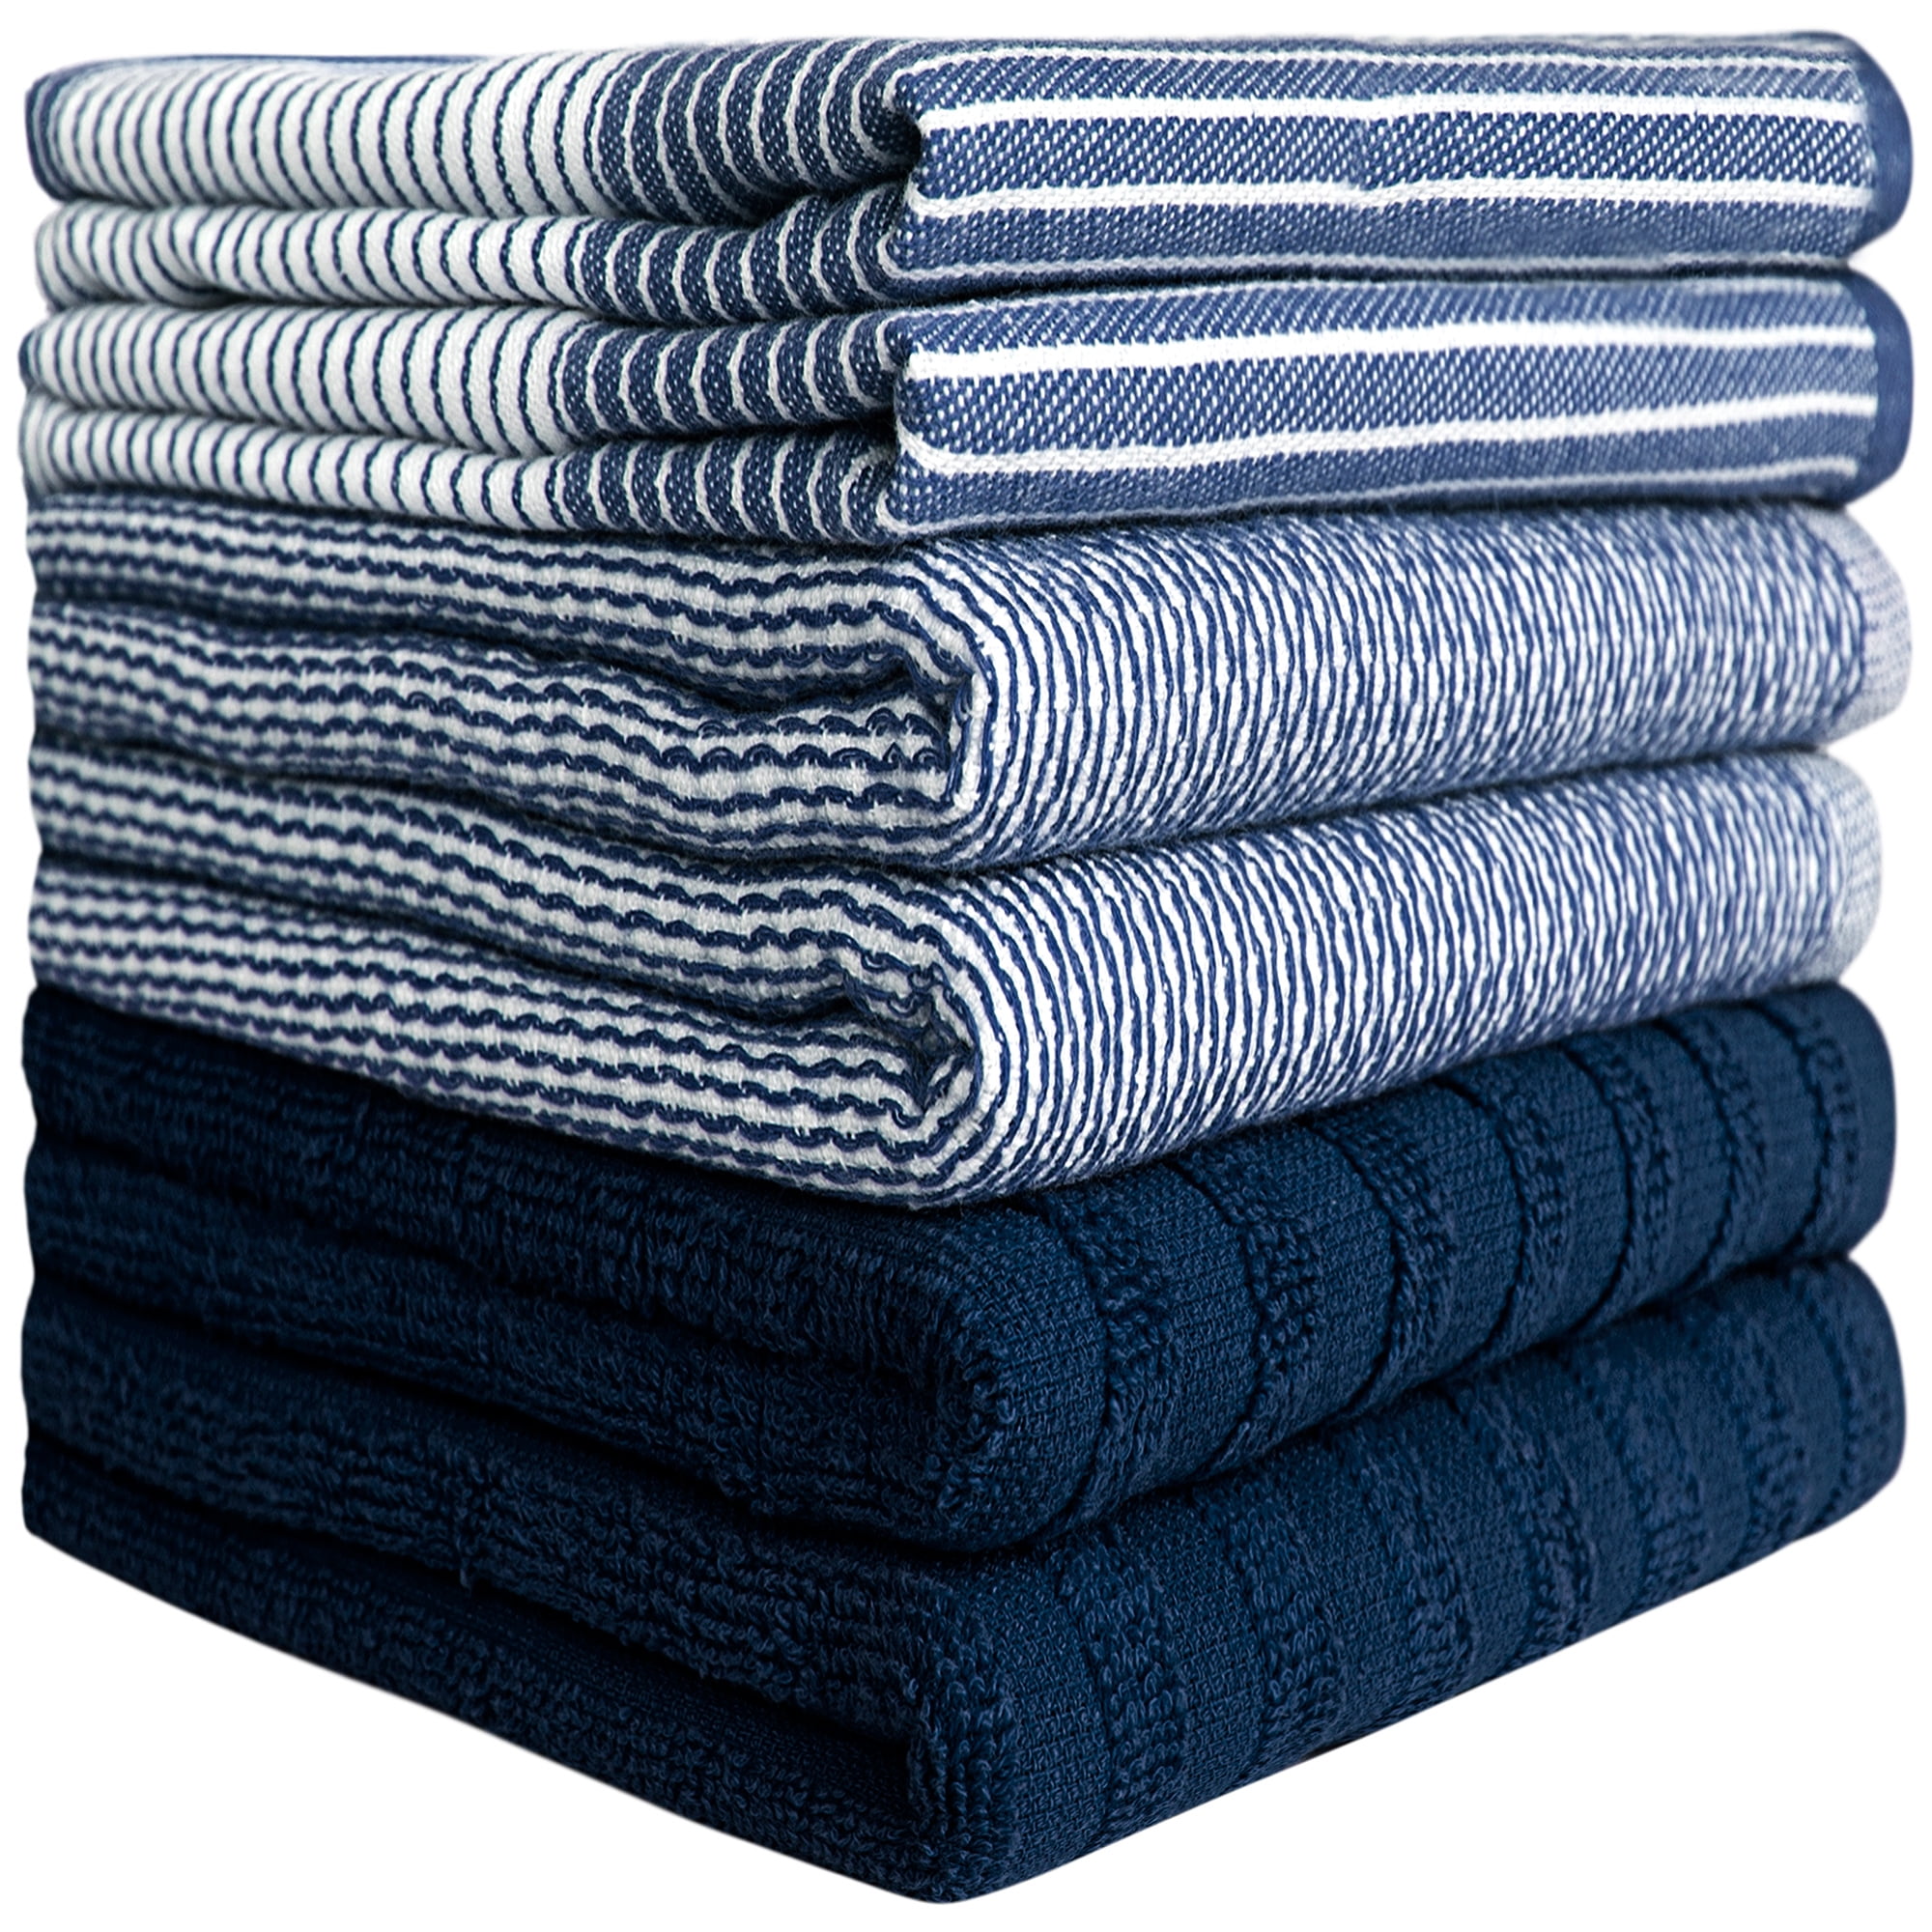 Worallymy Tea Towel Plaid Washing Cleaning Dishcloth Comfortable Soft Water  Absorbent Kitchen Polyester Washcloth Towels for Househoud Dark Blue 